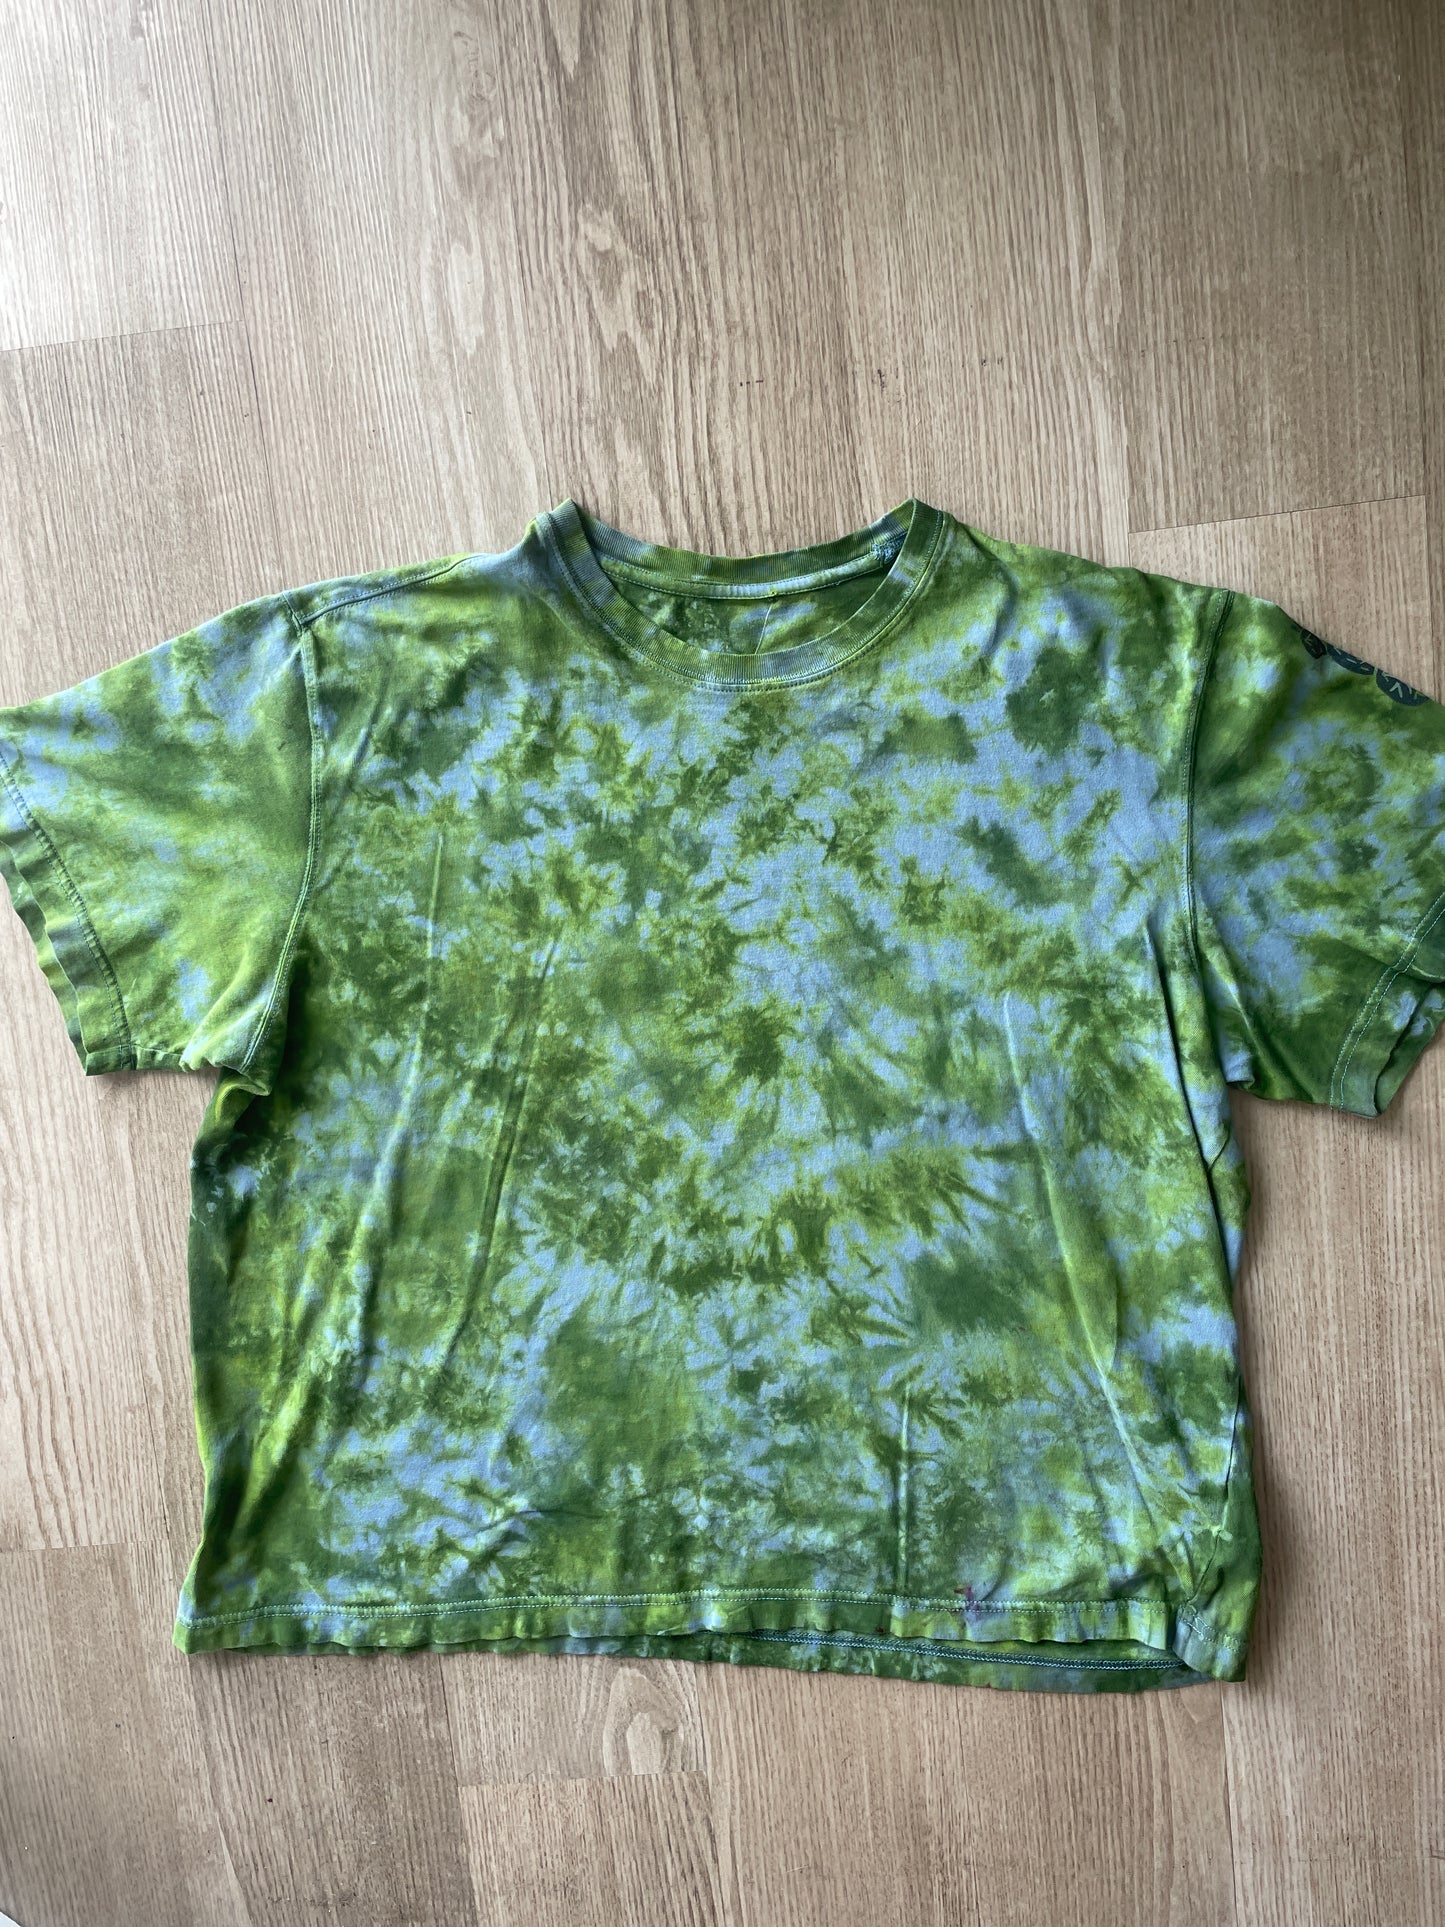 XL Men’s Prickly Pear Cactus Tie Dye T-Shirt | One-Of-a-Kind Shades of Green Crumpled Short Sleeve